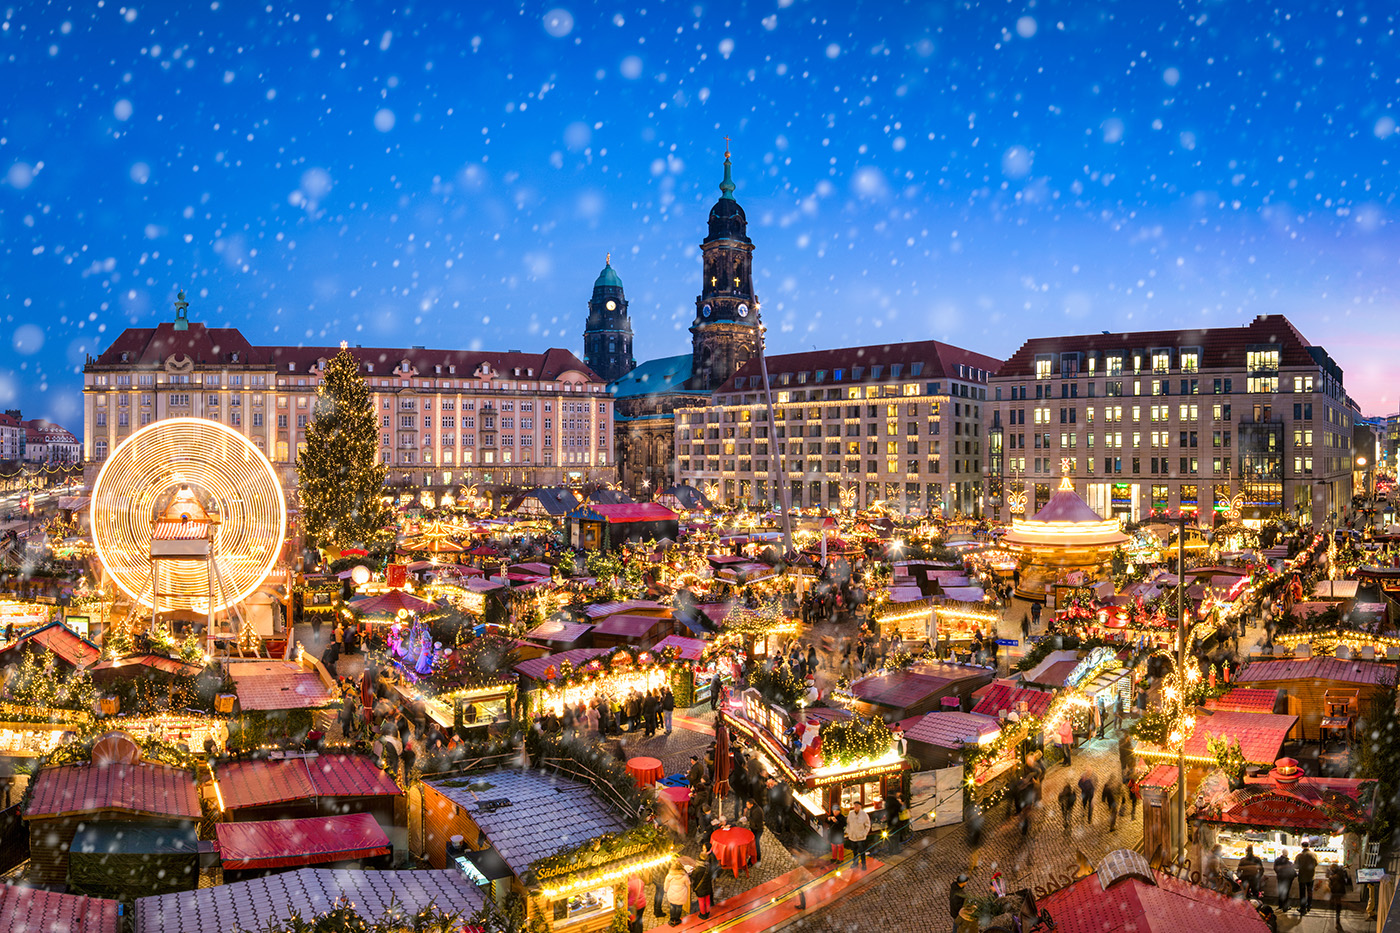 The Oldest and Most Iconic Christmas Market in the World